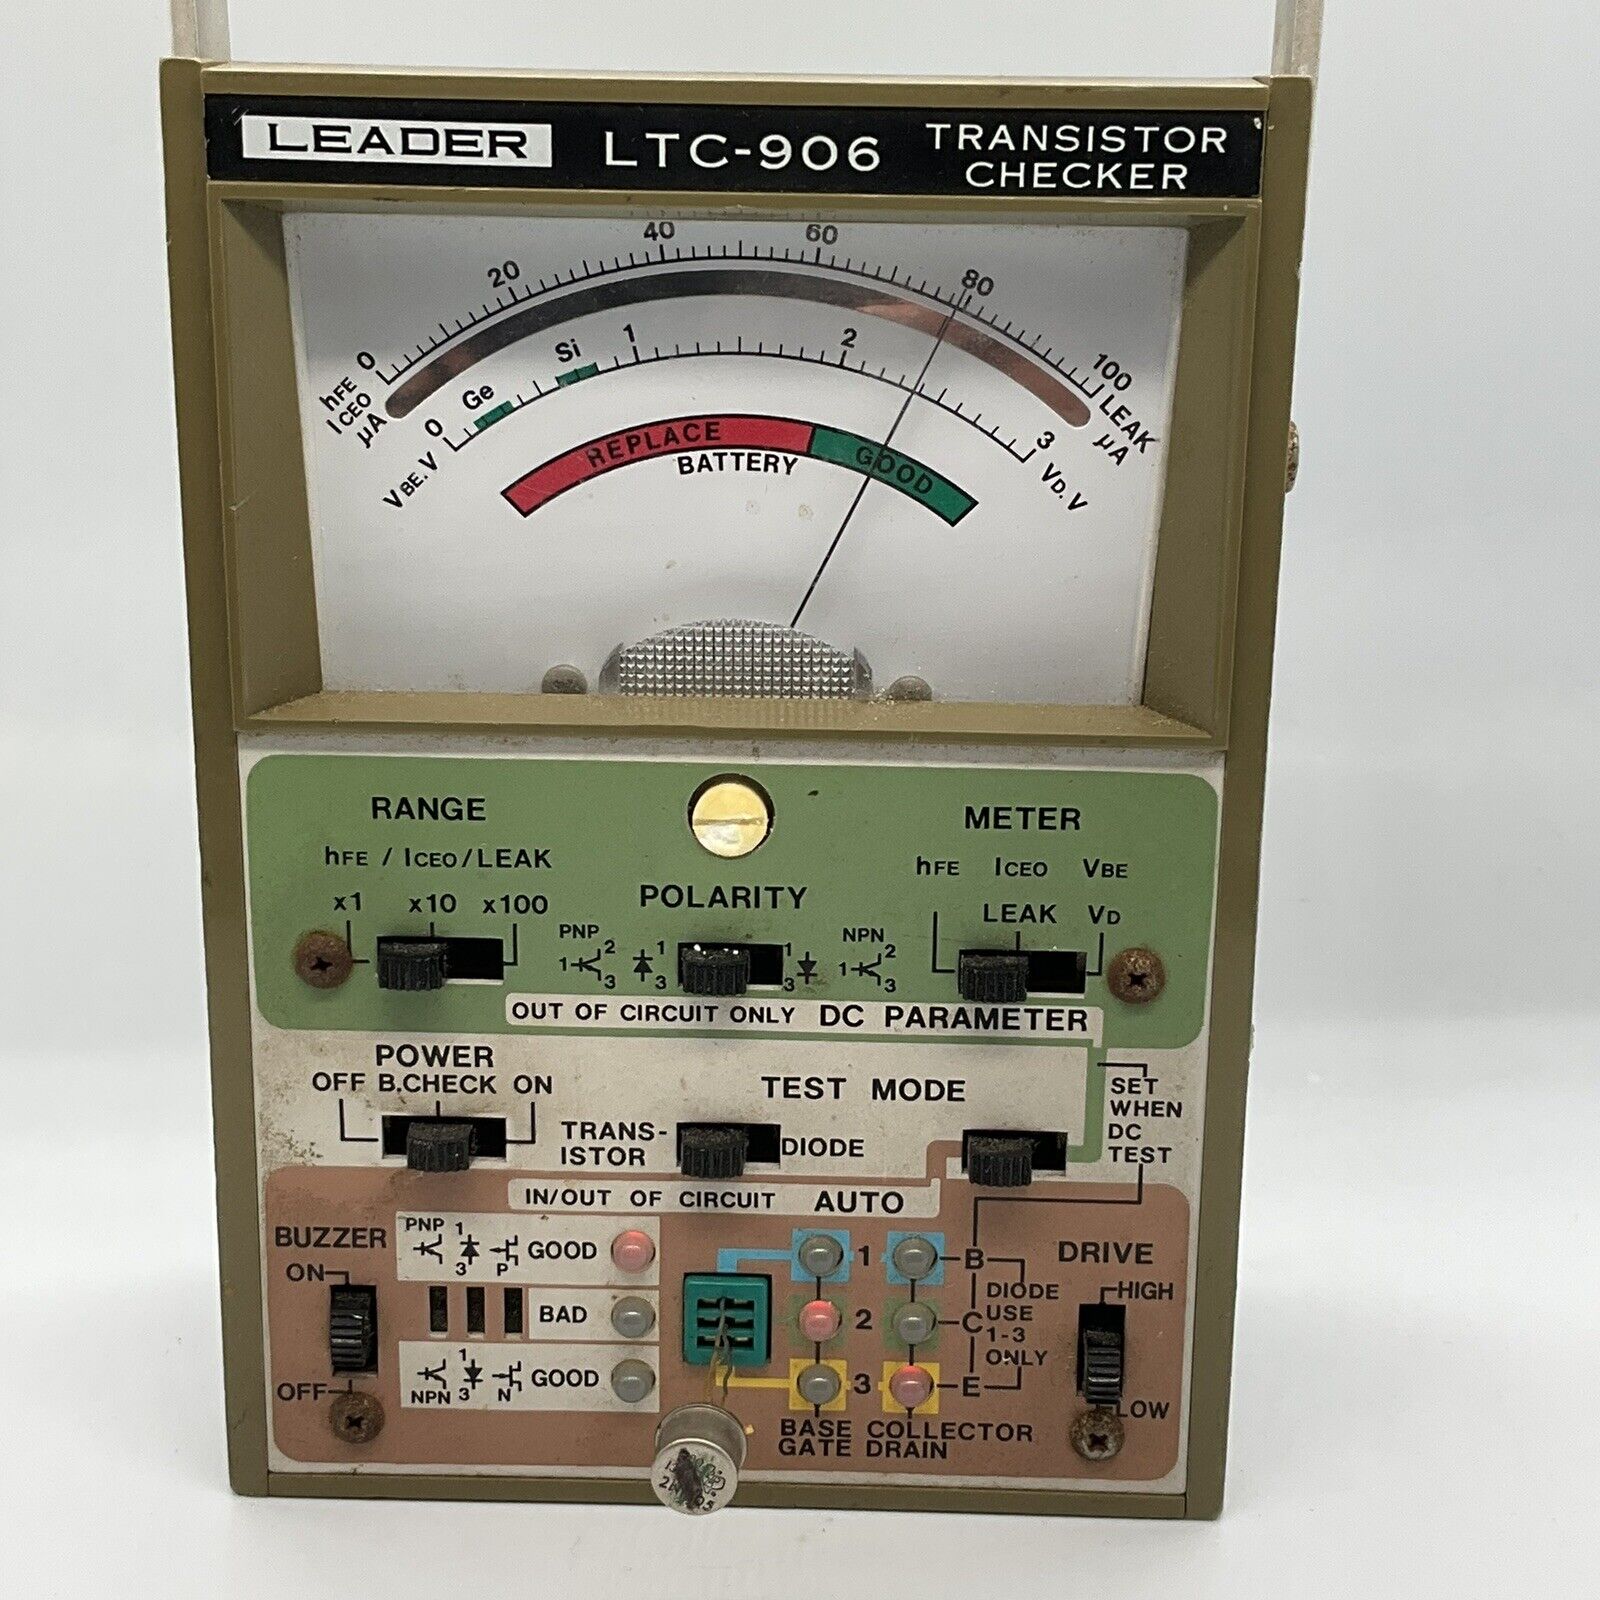 LEADER LTC-906 Semiconductor Transistor Checker Tester Only Read